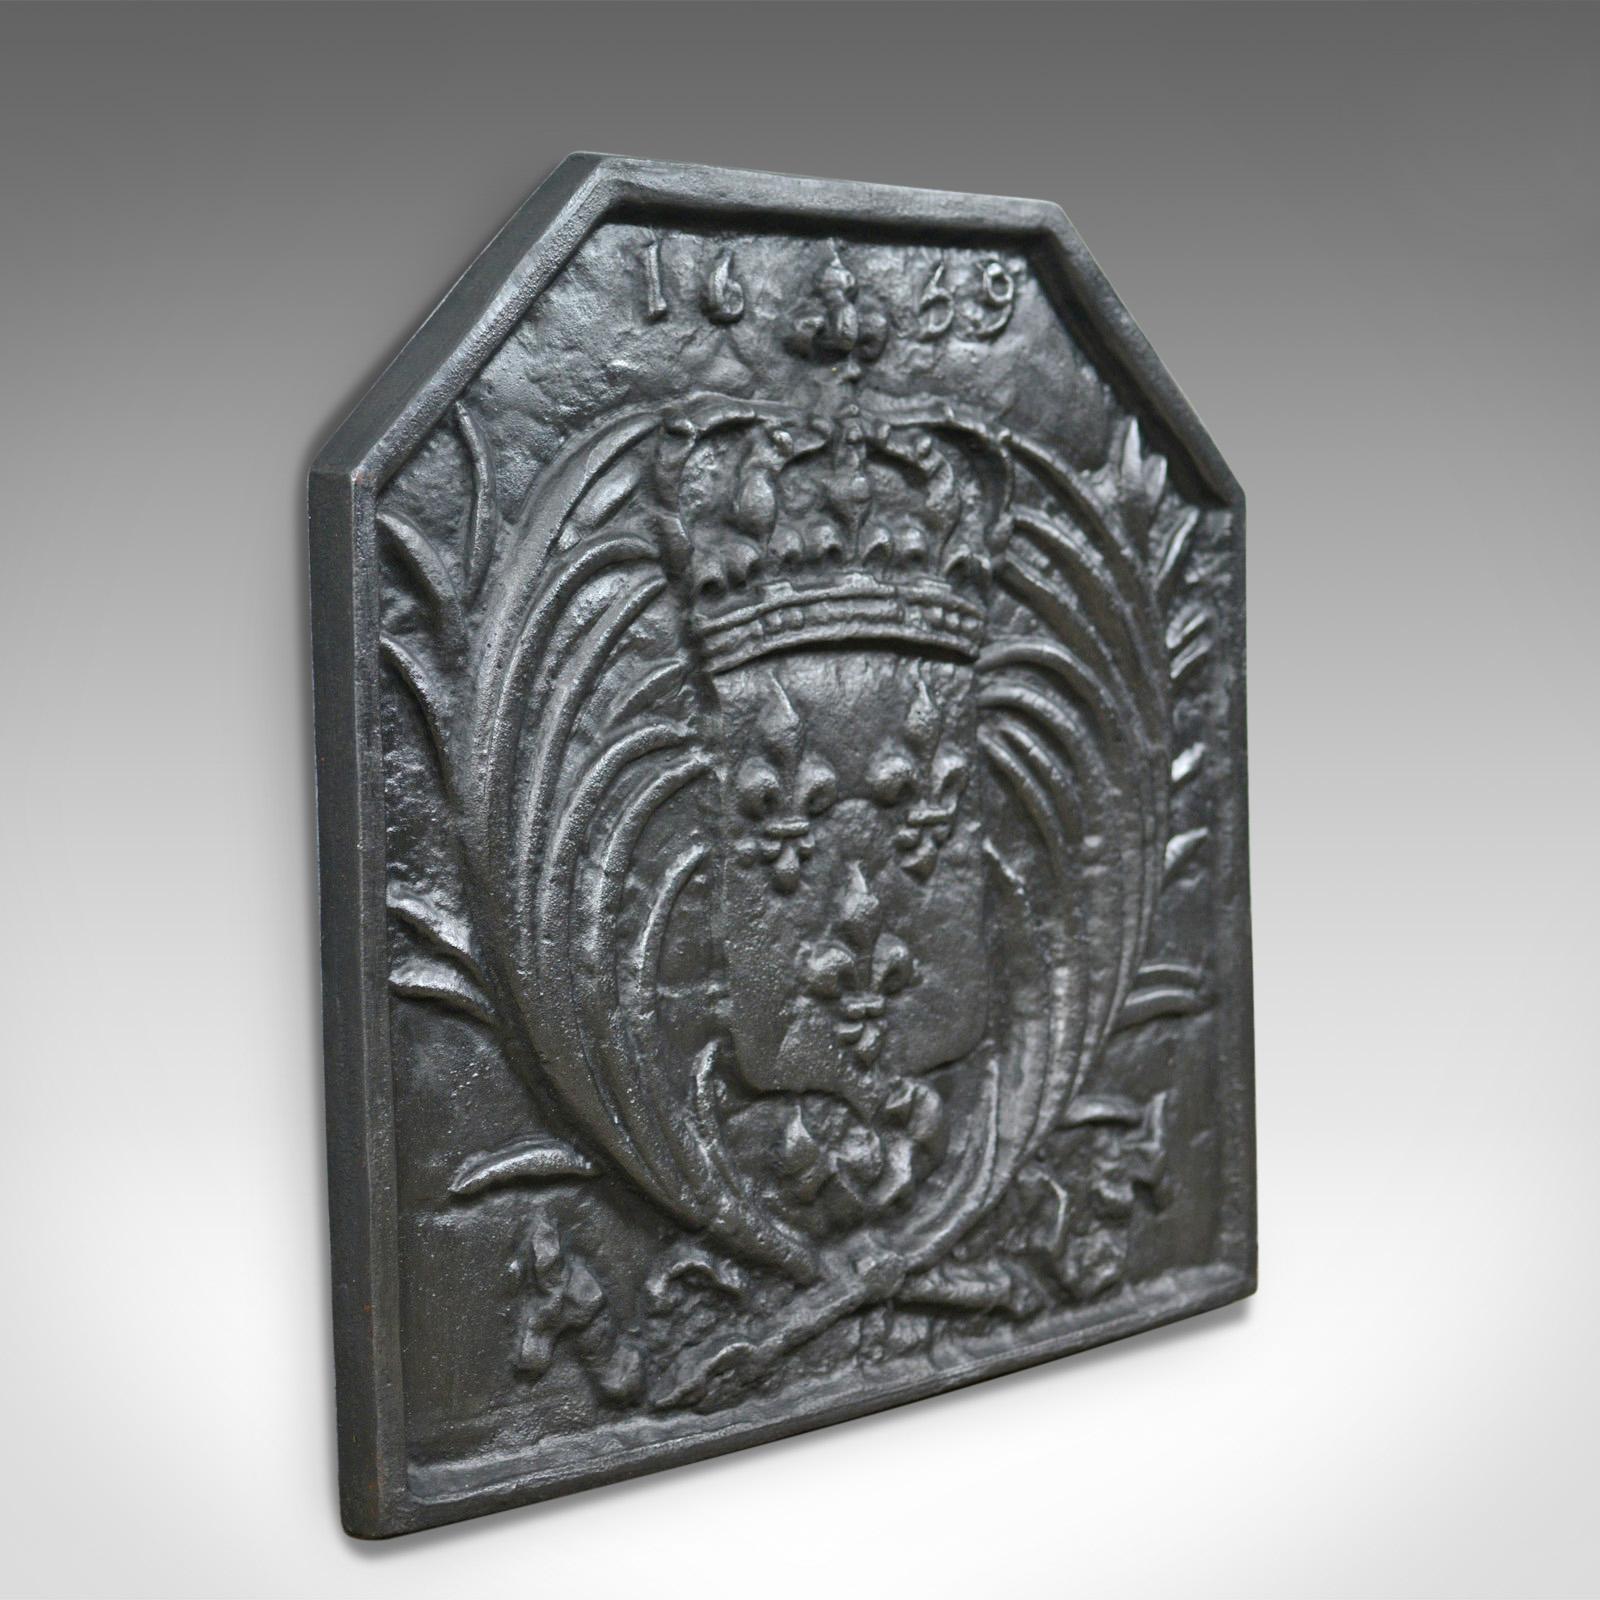 This is an antique cast iron fire back displaying a coat of arms. A heavy fire plate to back a fireplace and retain heat. A revival casting crafted in the early 20th century.

Heavy fire back in cast iron with a graphite finish
Featuring a canted